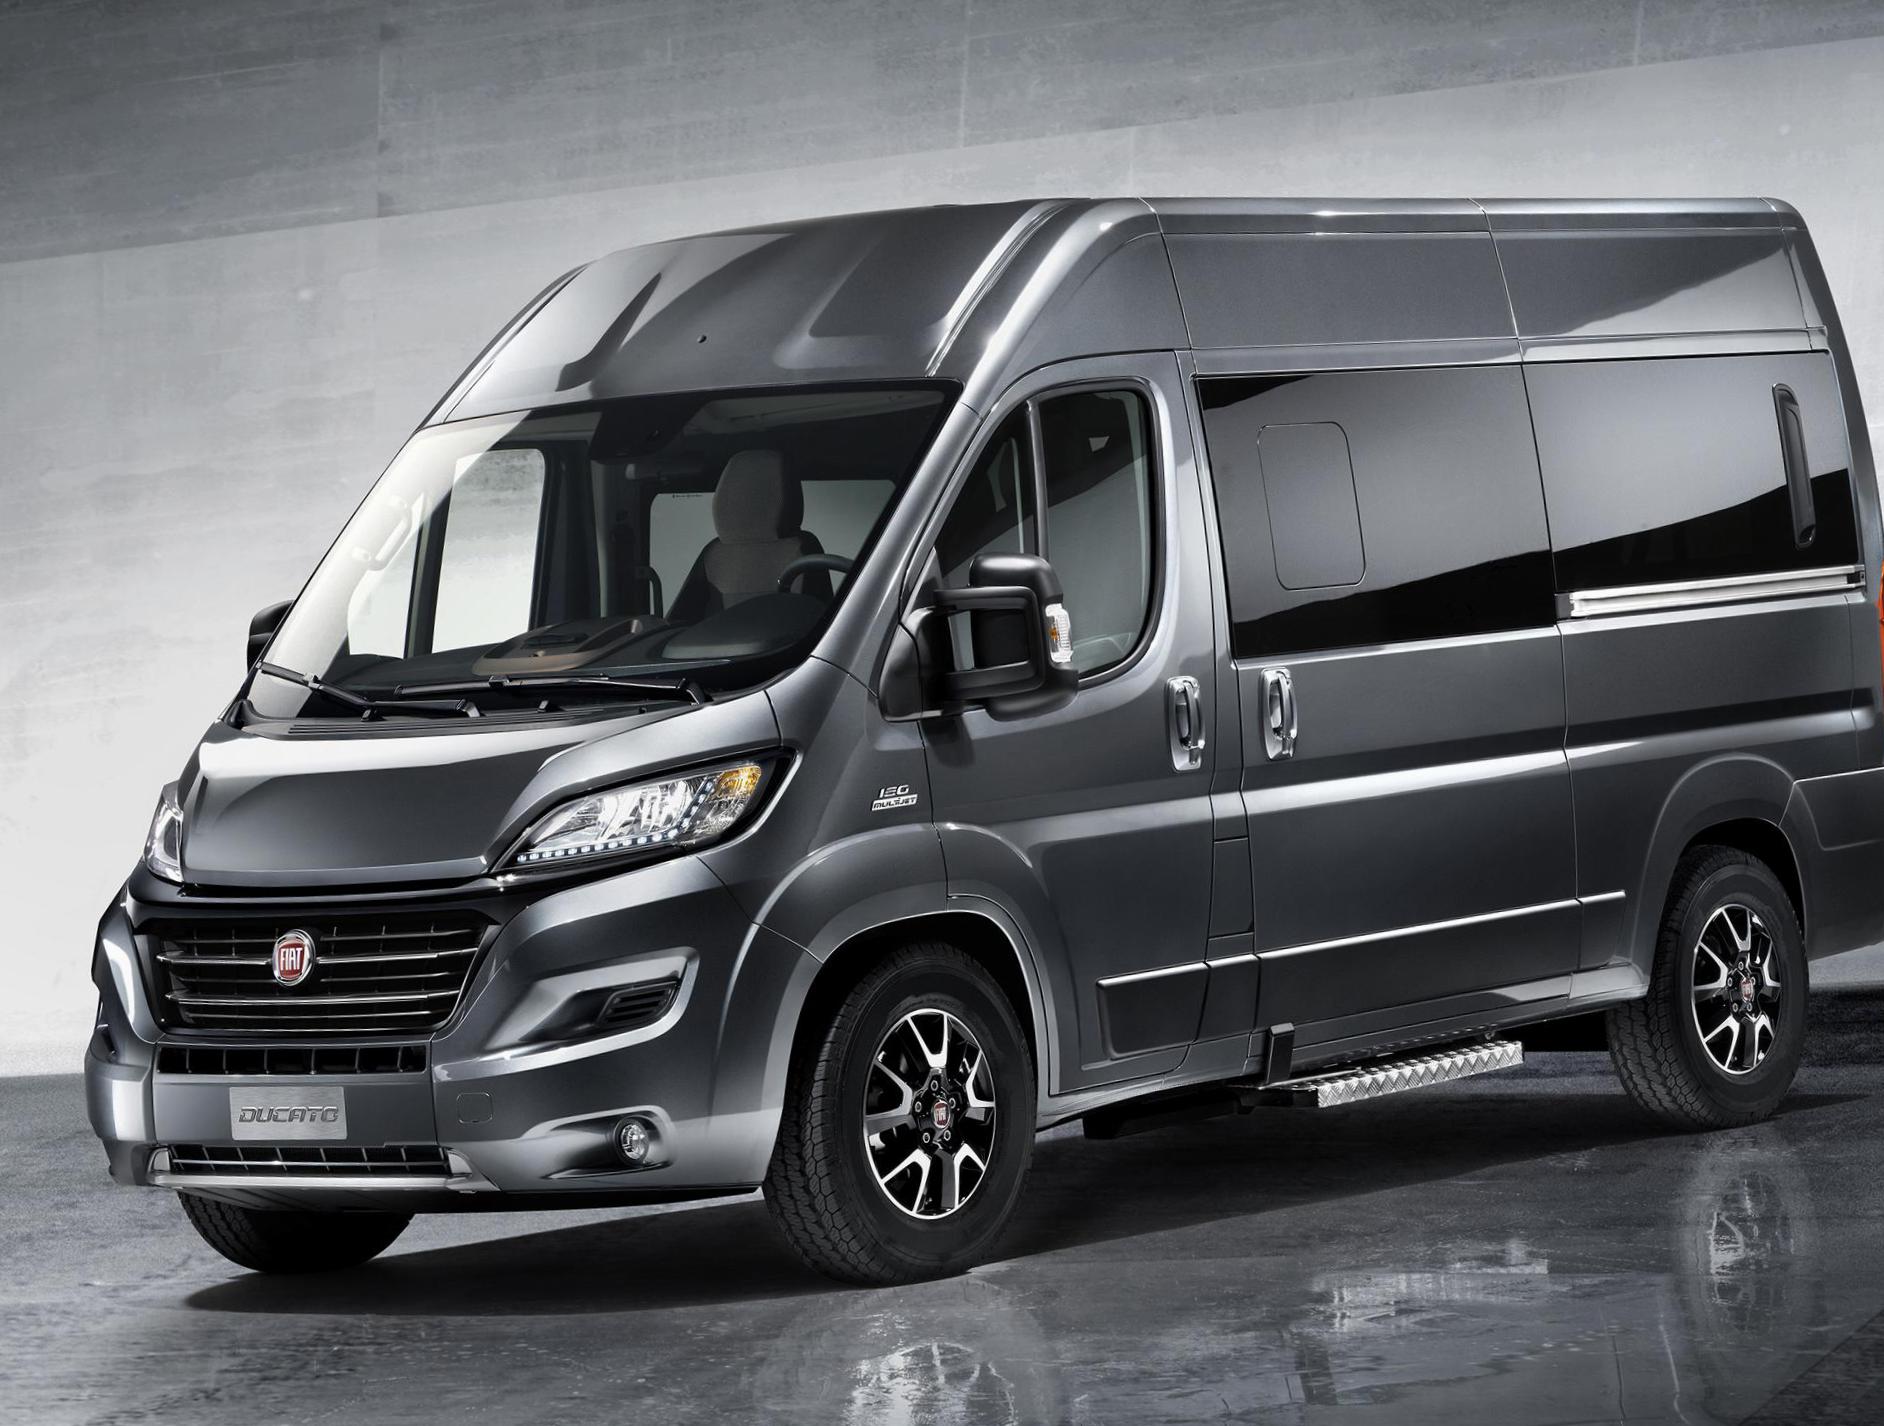 Fiat Ducato Panorama Specifications 2010